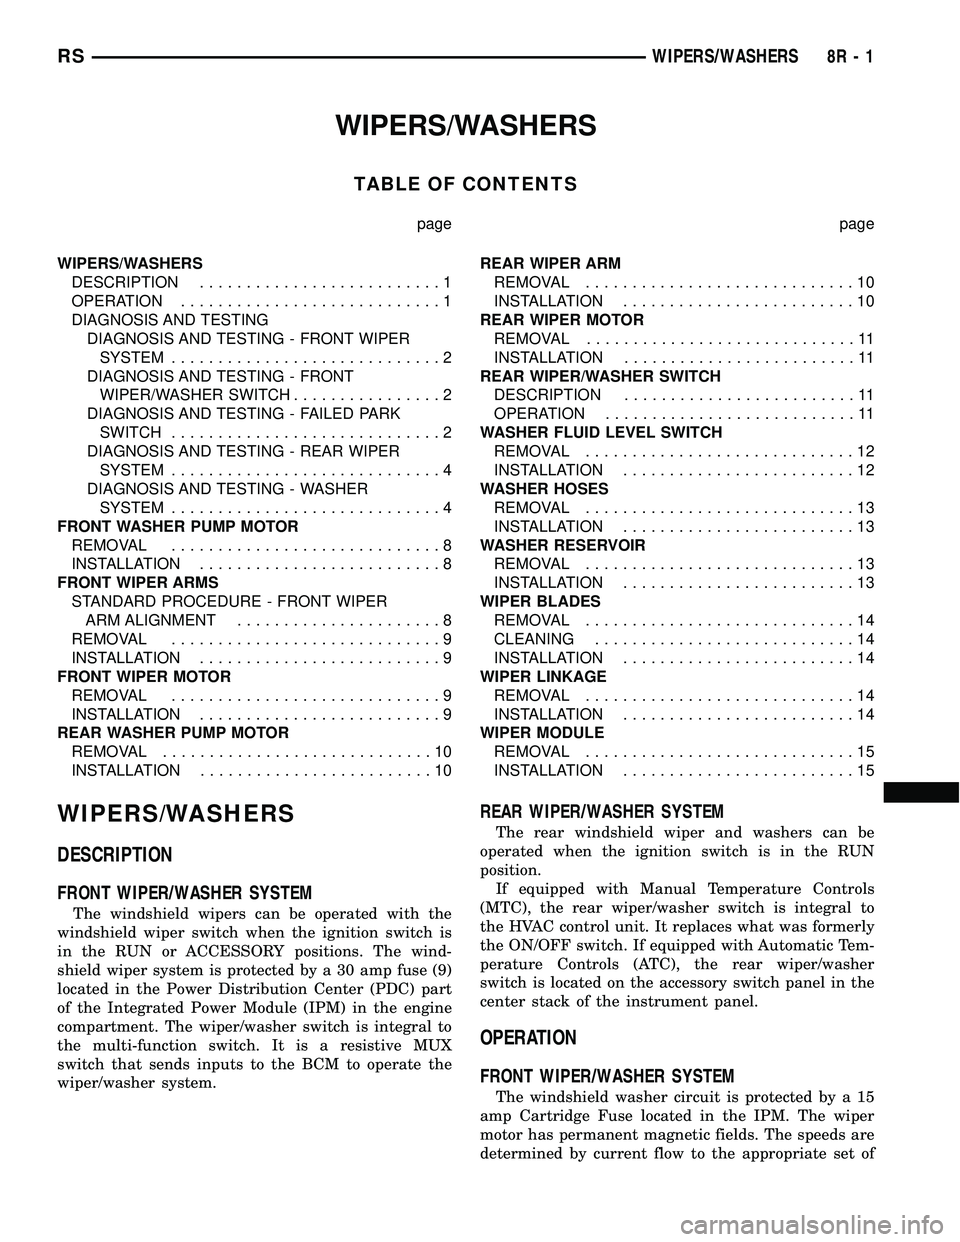 DODGE TOWN AND COUNTRY 2004  Service Manual WIPERS/WASHERS
TABLE OF CONTENTS
page page
WIPERS/WASHERS
DESCRIPTION..........................1
OPERATION............................1
DIAGNOSIS AND TESTING
DIAGNOSIS AND TESTING - FRONT WIPER
SYSTEM